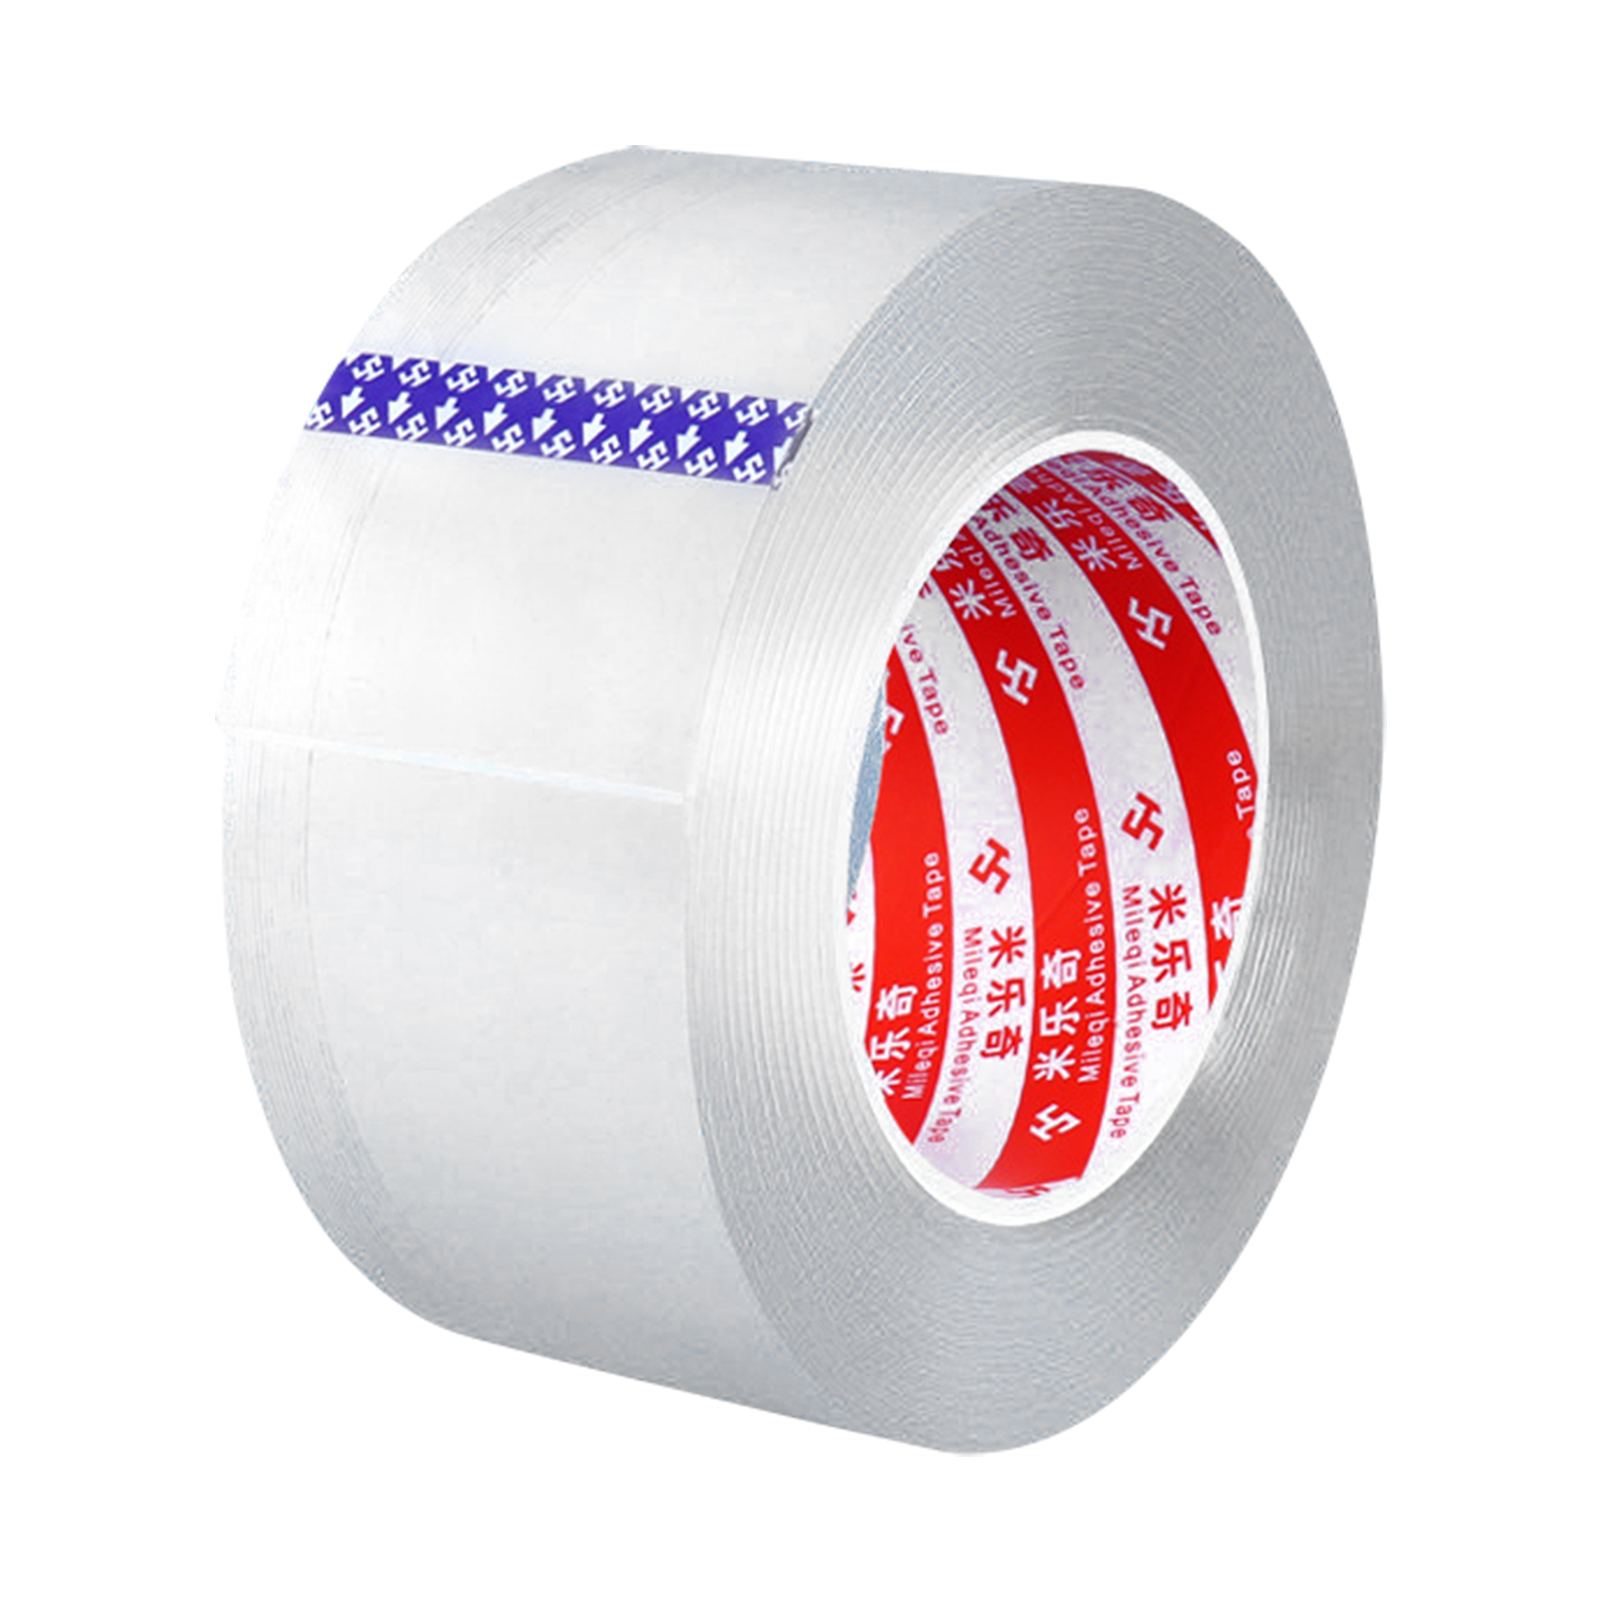 Nano Tape Heavy Duty Double Sided Mounting Adhesive Tape Washable Removable Tapes for Indoor Outdoor Walls Fixing Office Supplie